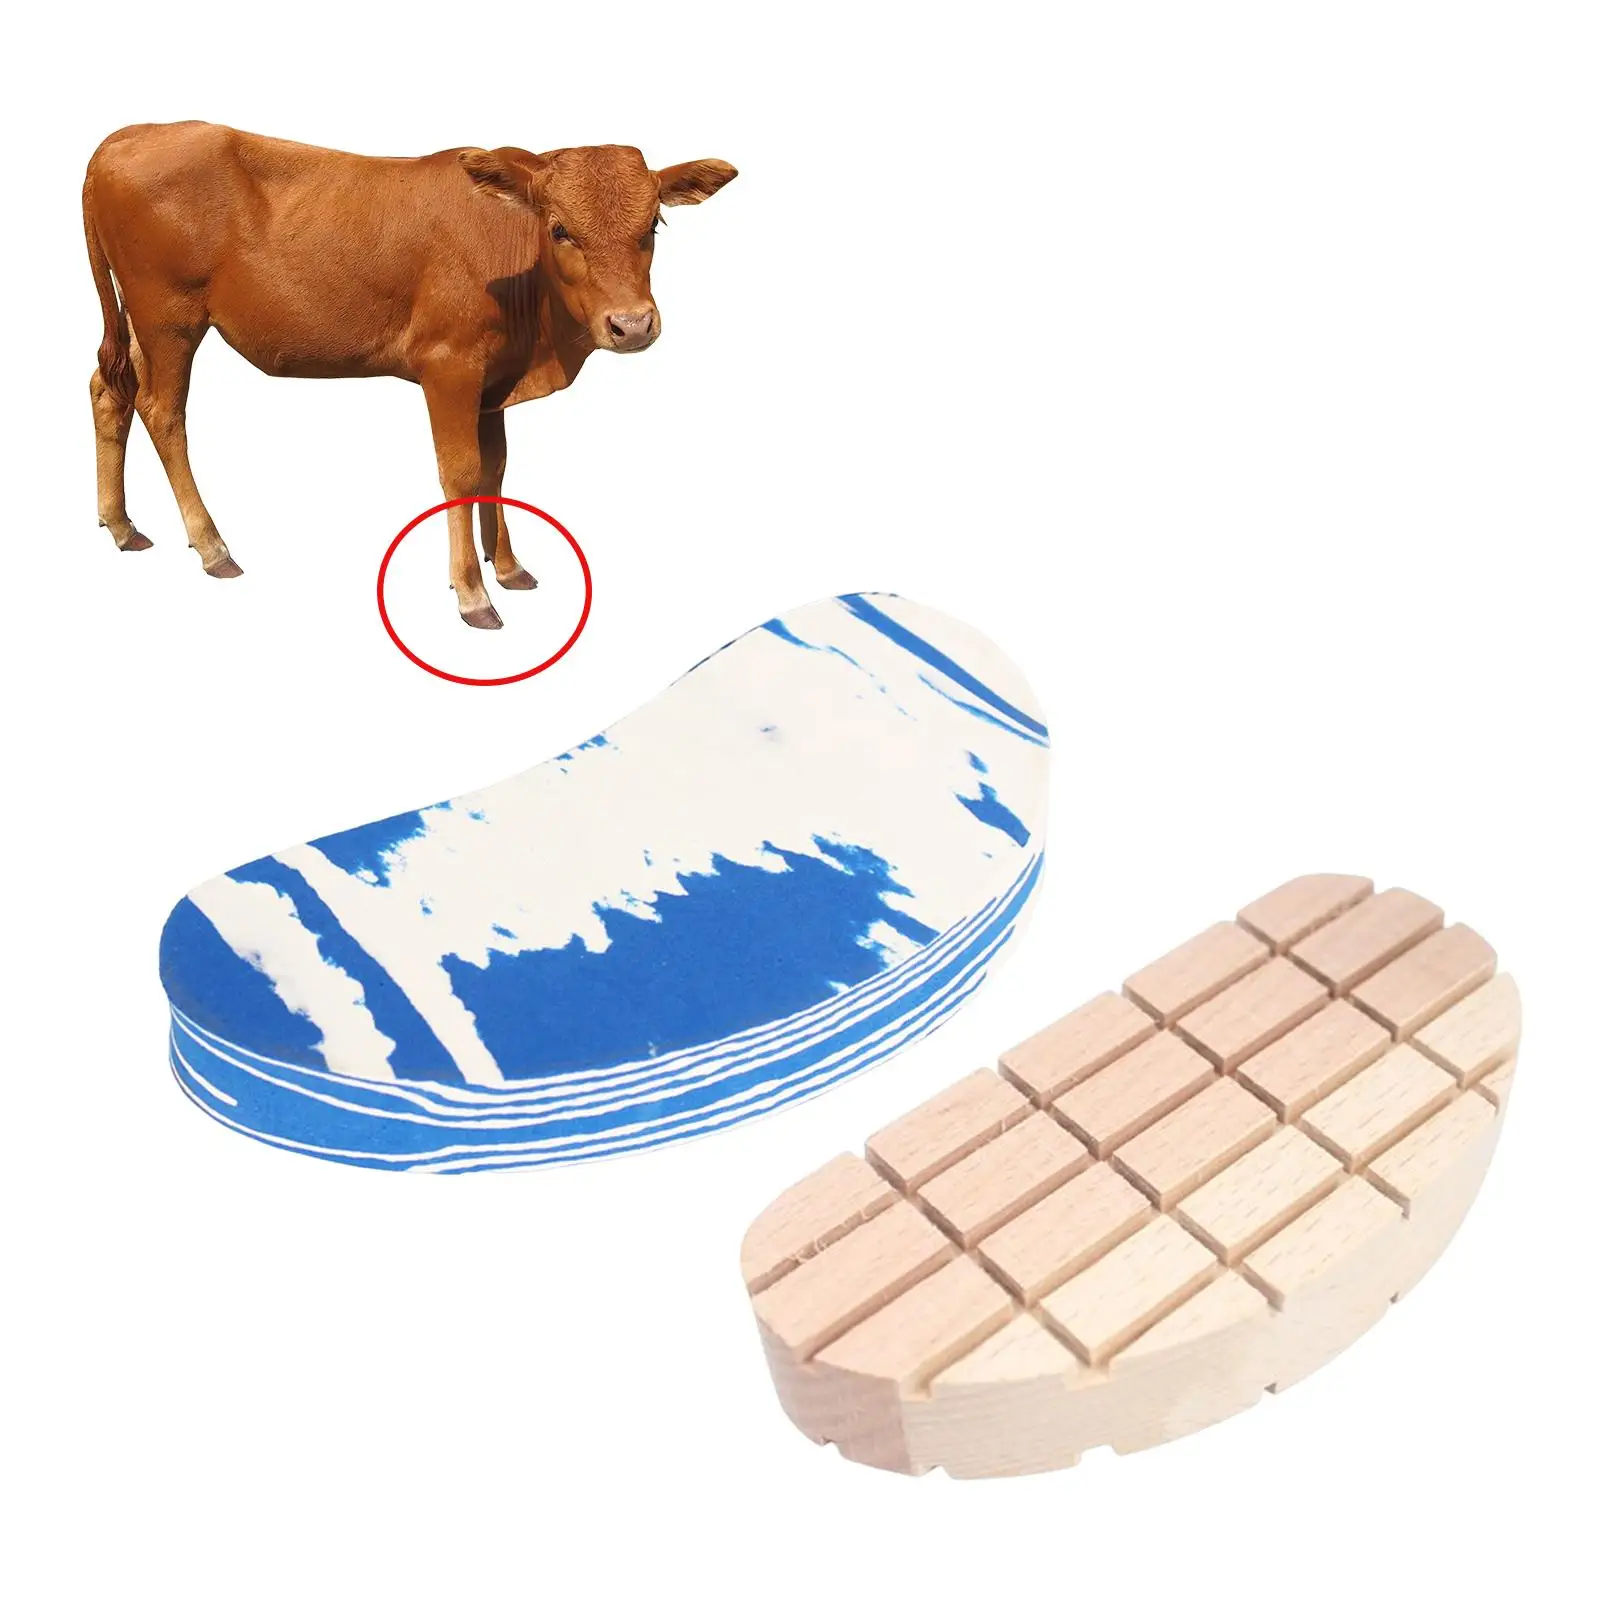 Cow Hoof Pad Farrier Tools Riding Farms Rubber Durable for Cattles Sheep Horses Pasture